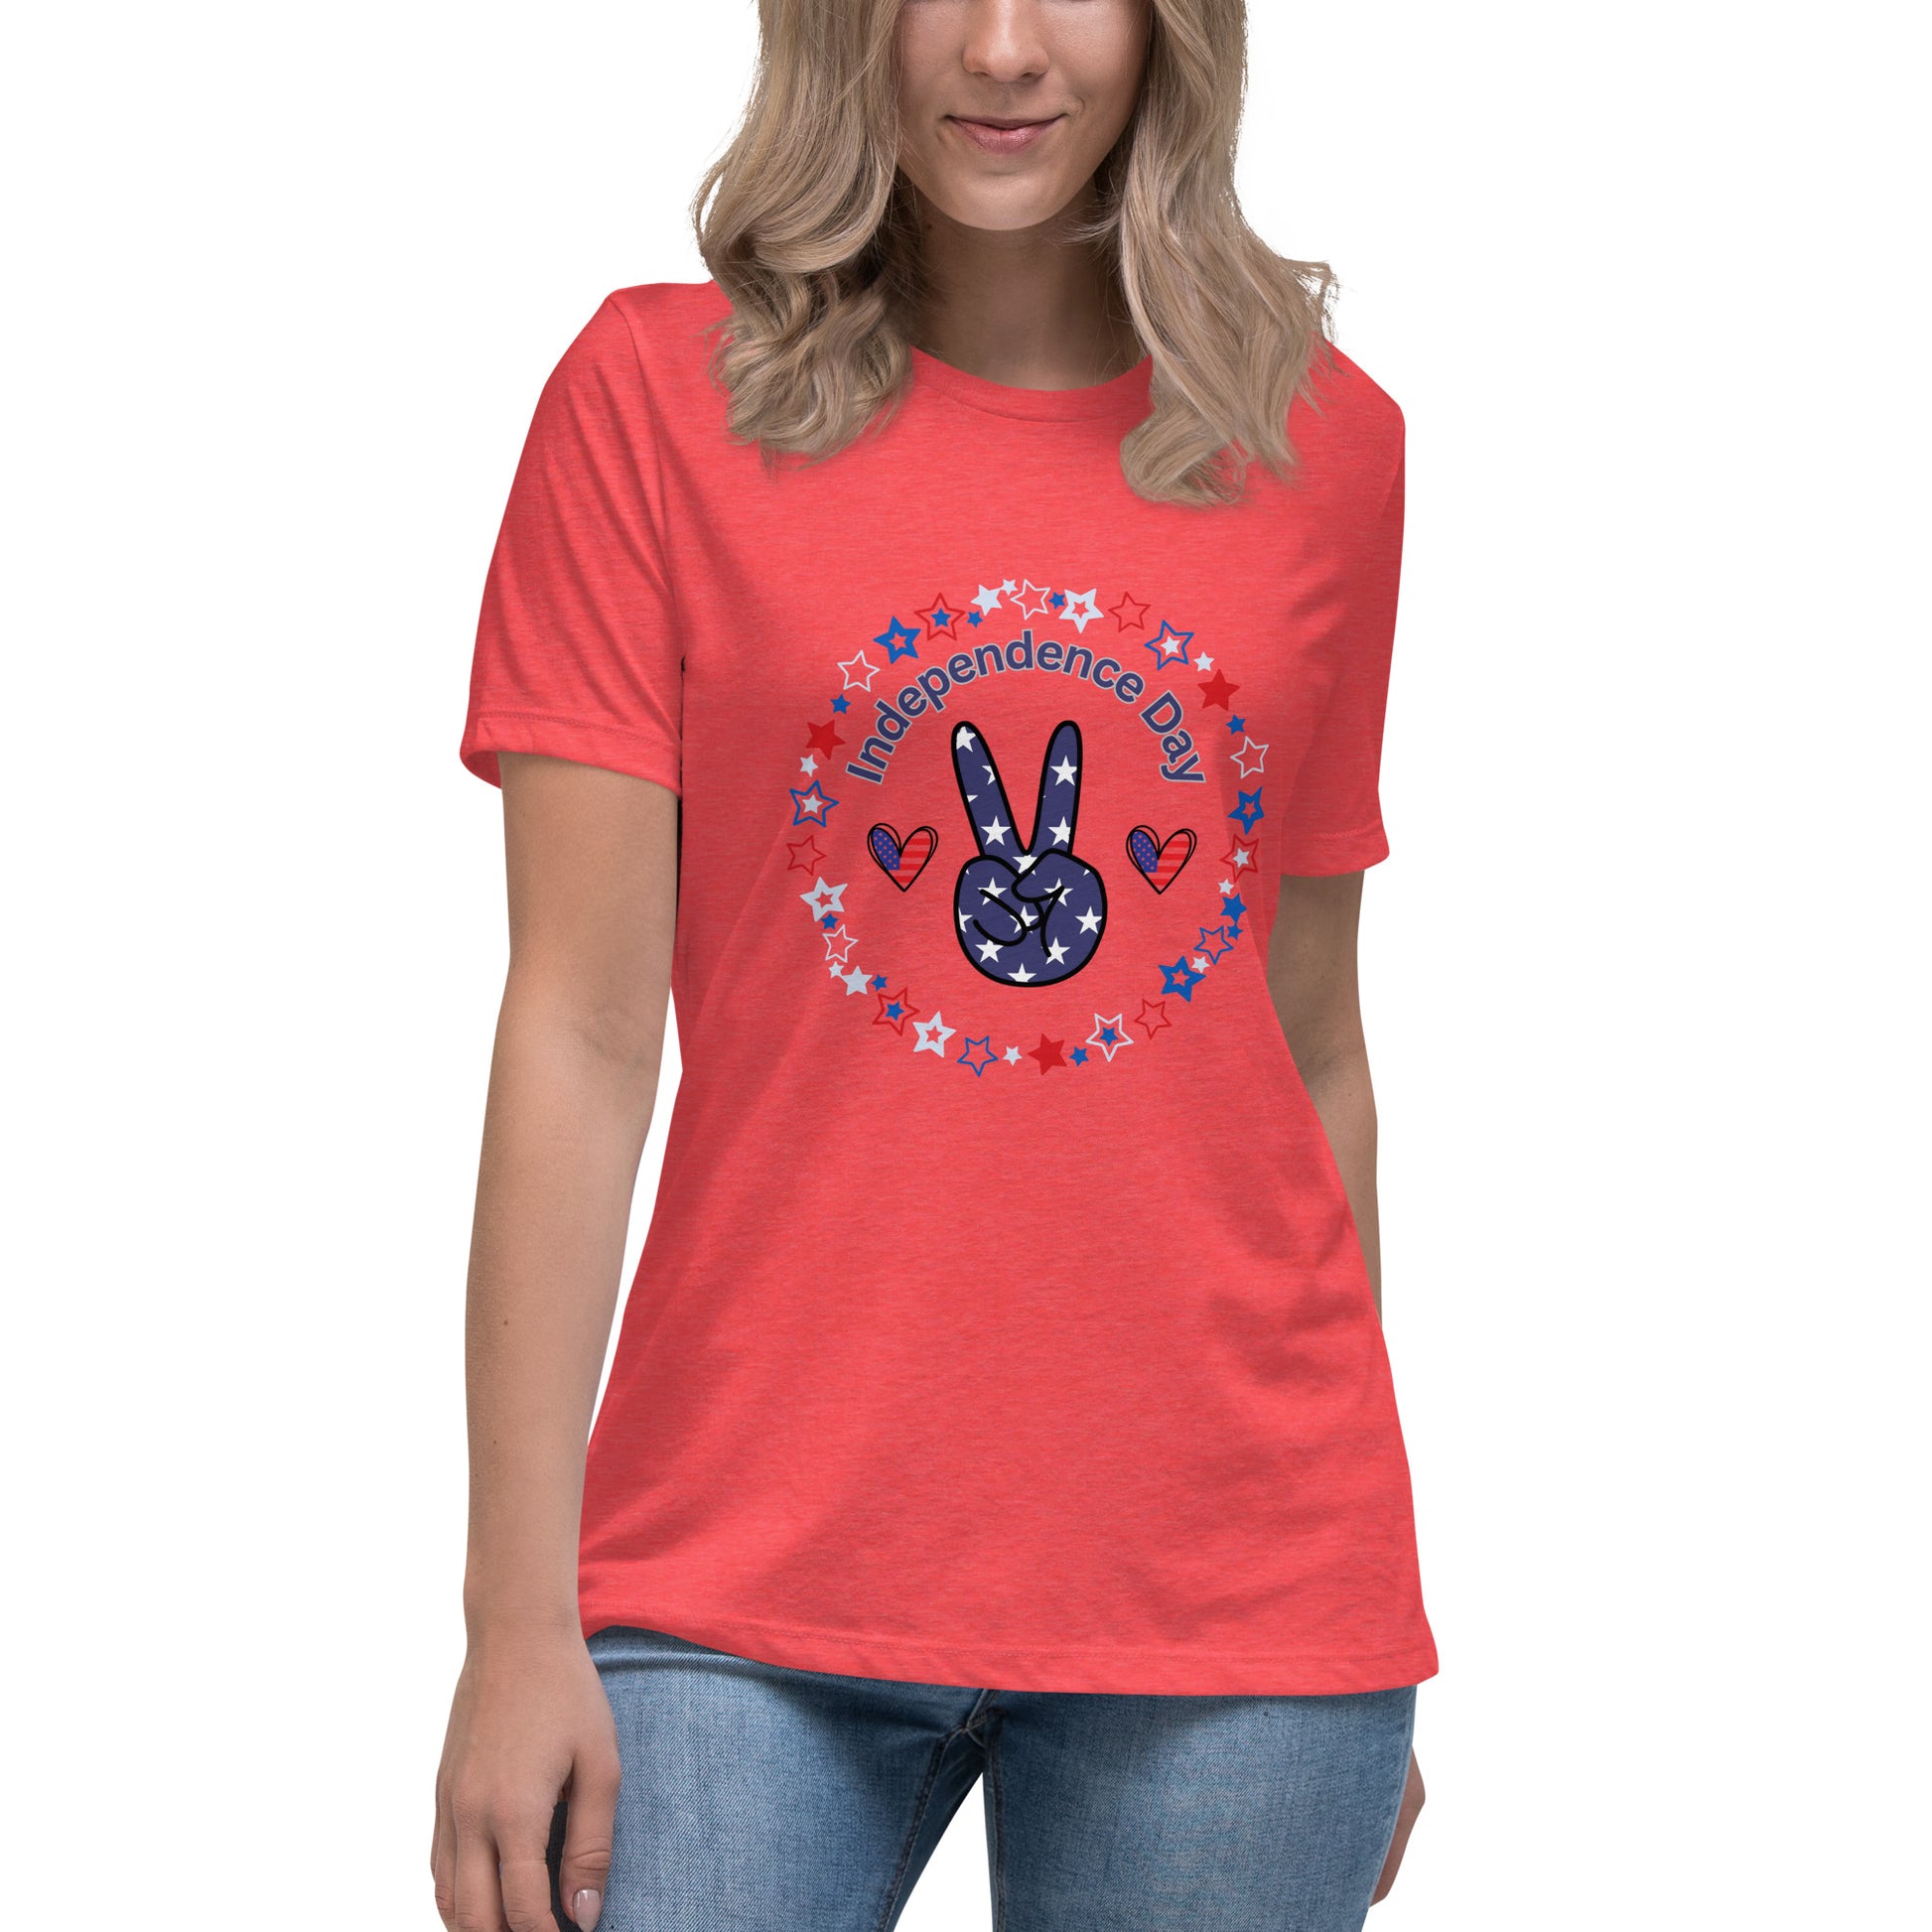 Women's Relaxed T-Shirt - Independence Day 4th of July T-shirt Stylin' Spirit Heather Red S 